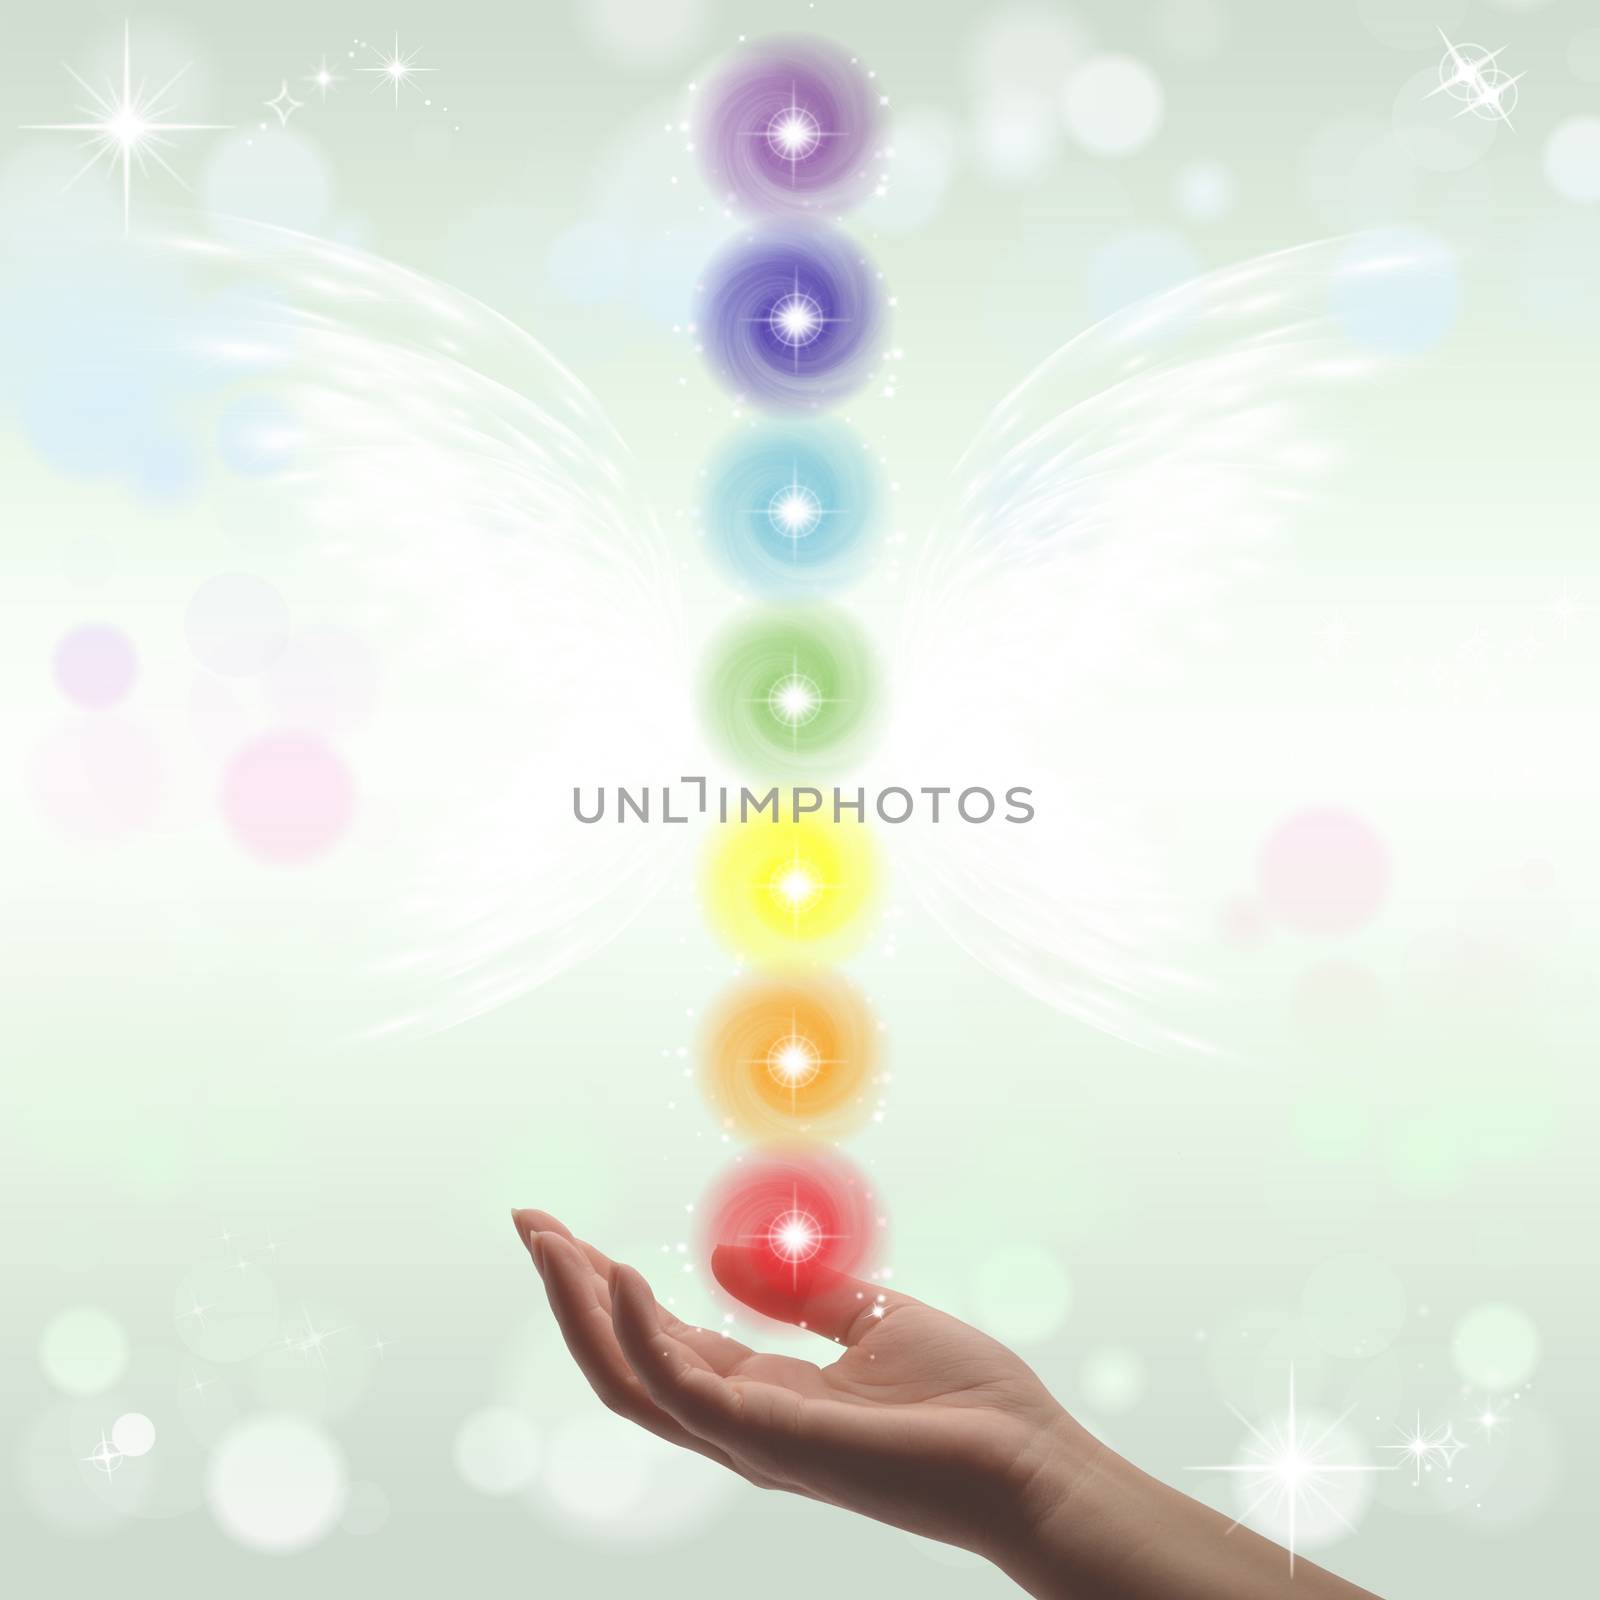 Healing Hand and seven chakras on a sparkling pastel coloured background